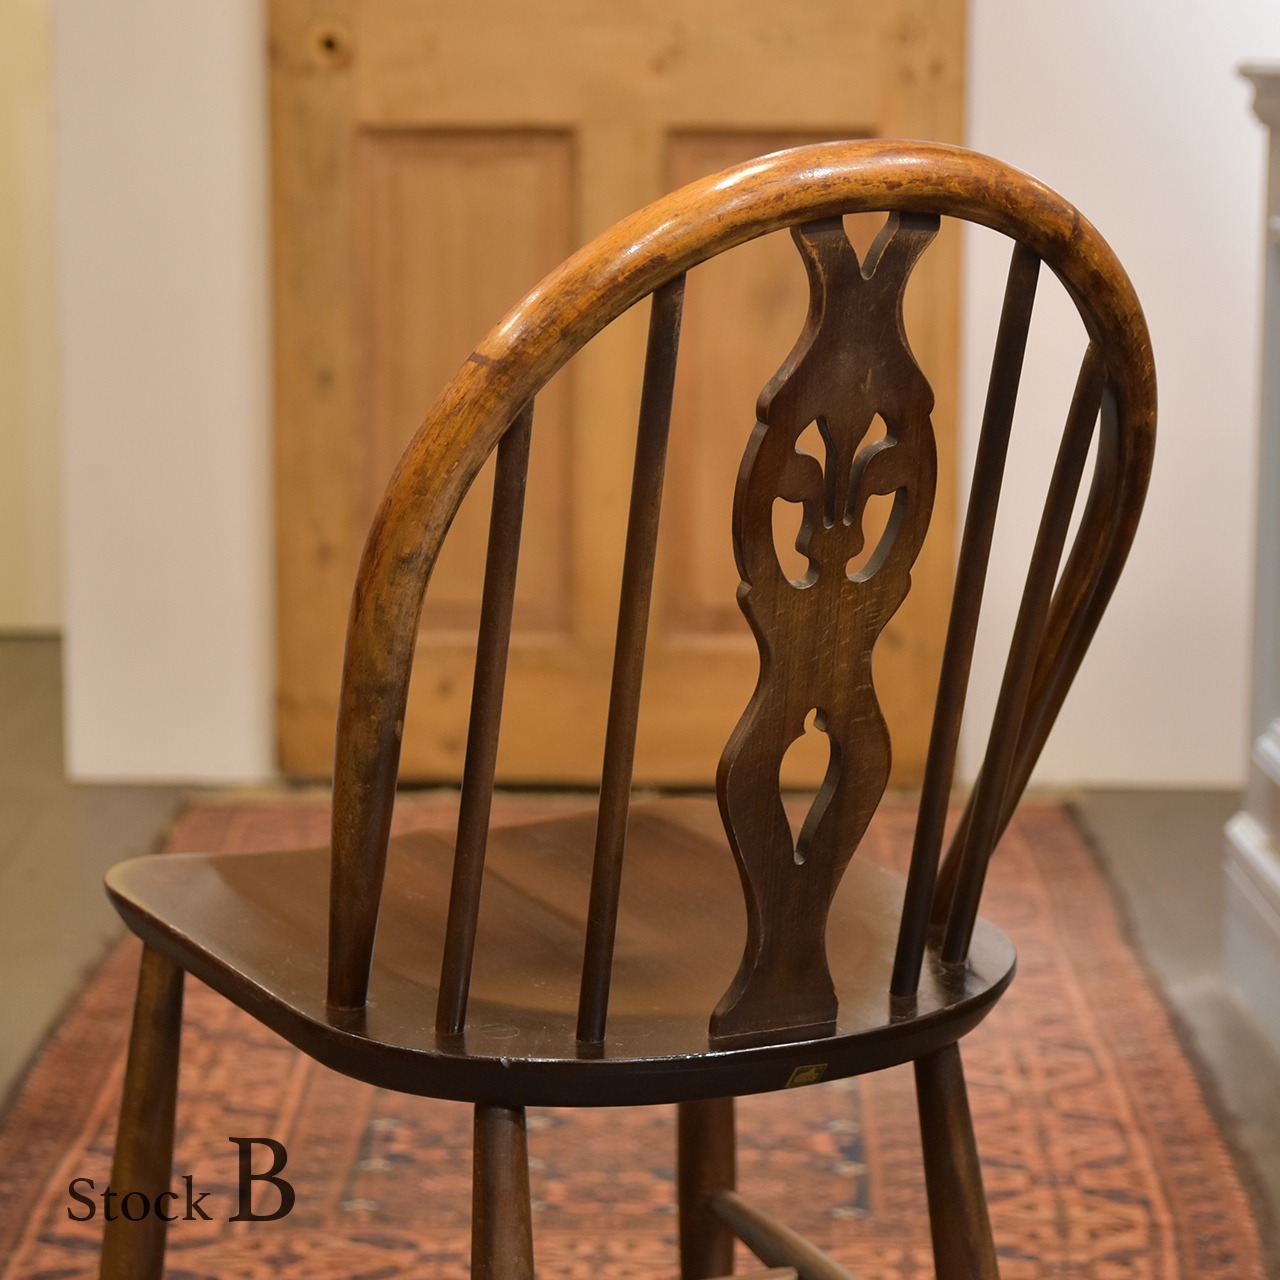 Ercol Thistle back Chair【B】  / アーコール シスルバック チェア / 2010BNS-001B